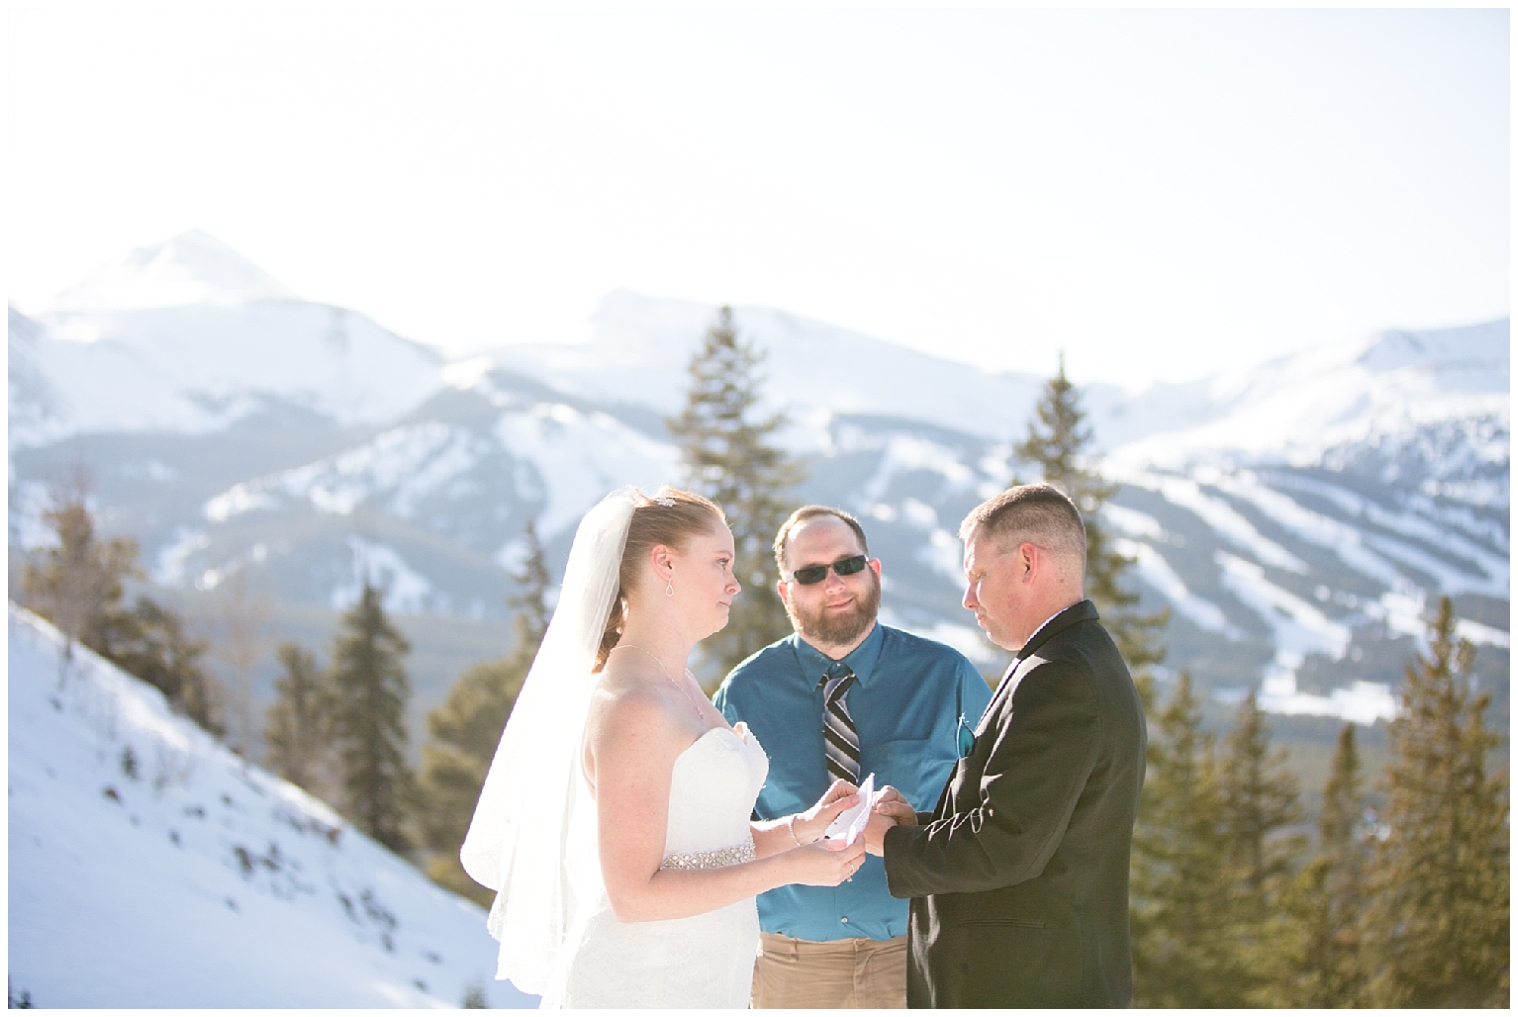 The wedding couple stand at the altar at their Colorado mountain elopement ceremony.